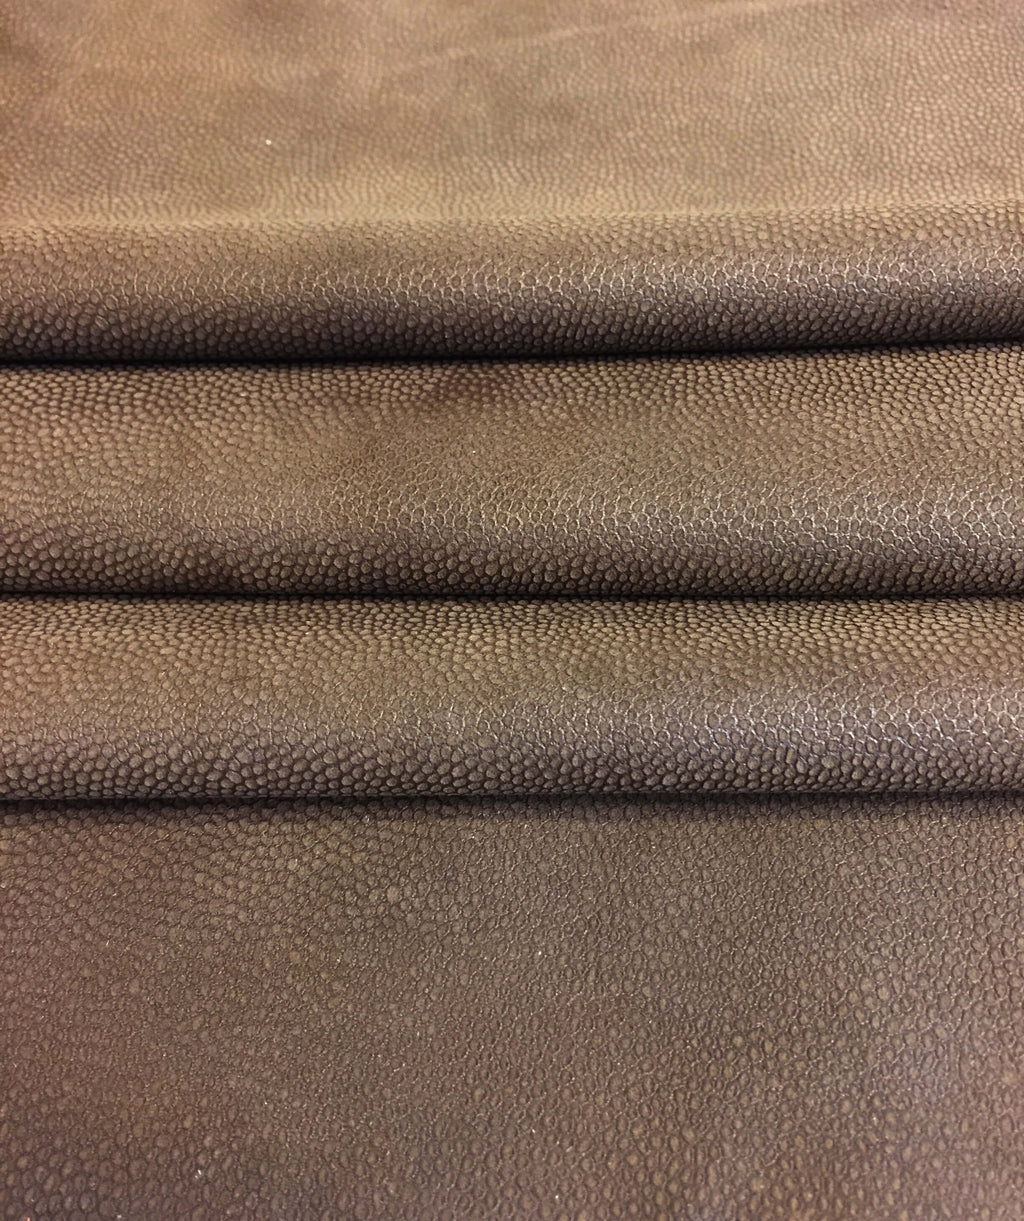 Brown Genuine Leather hides for sale 